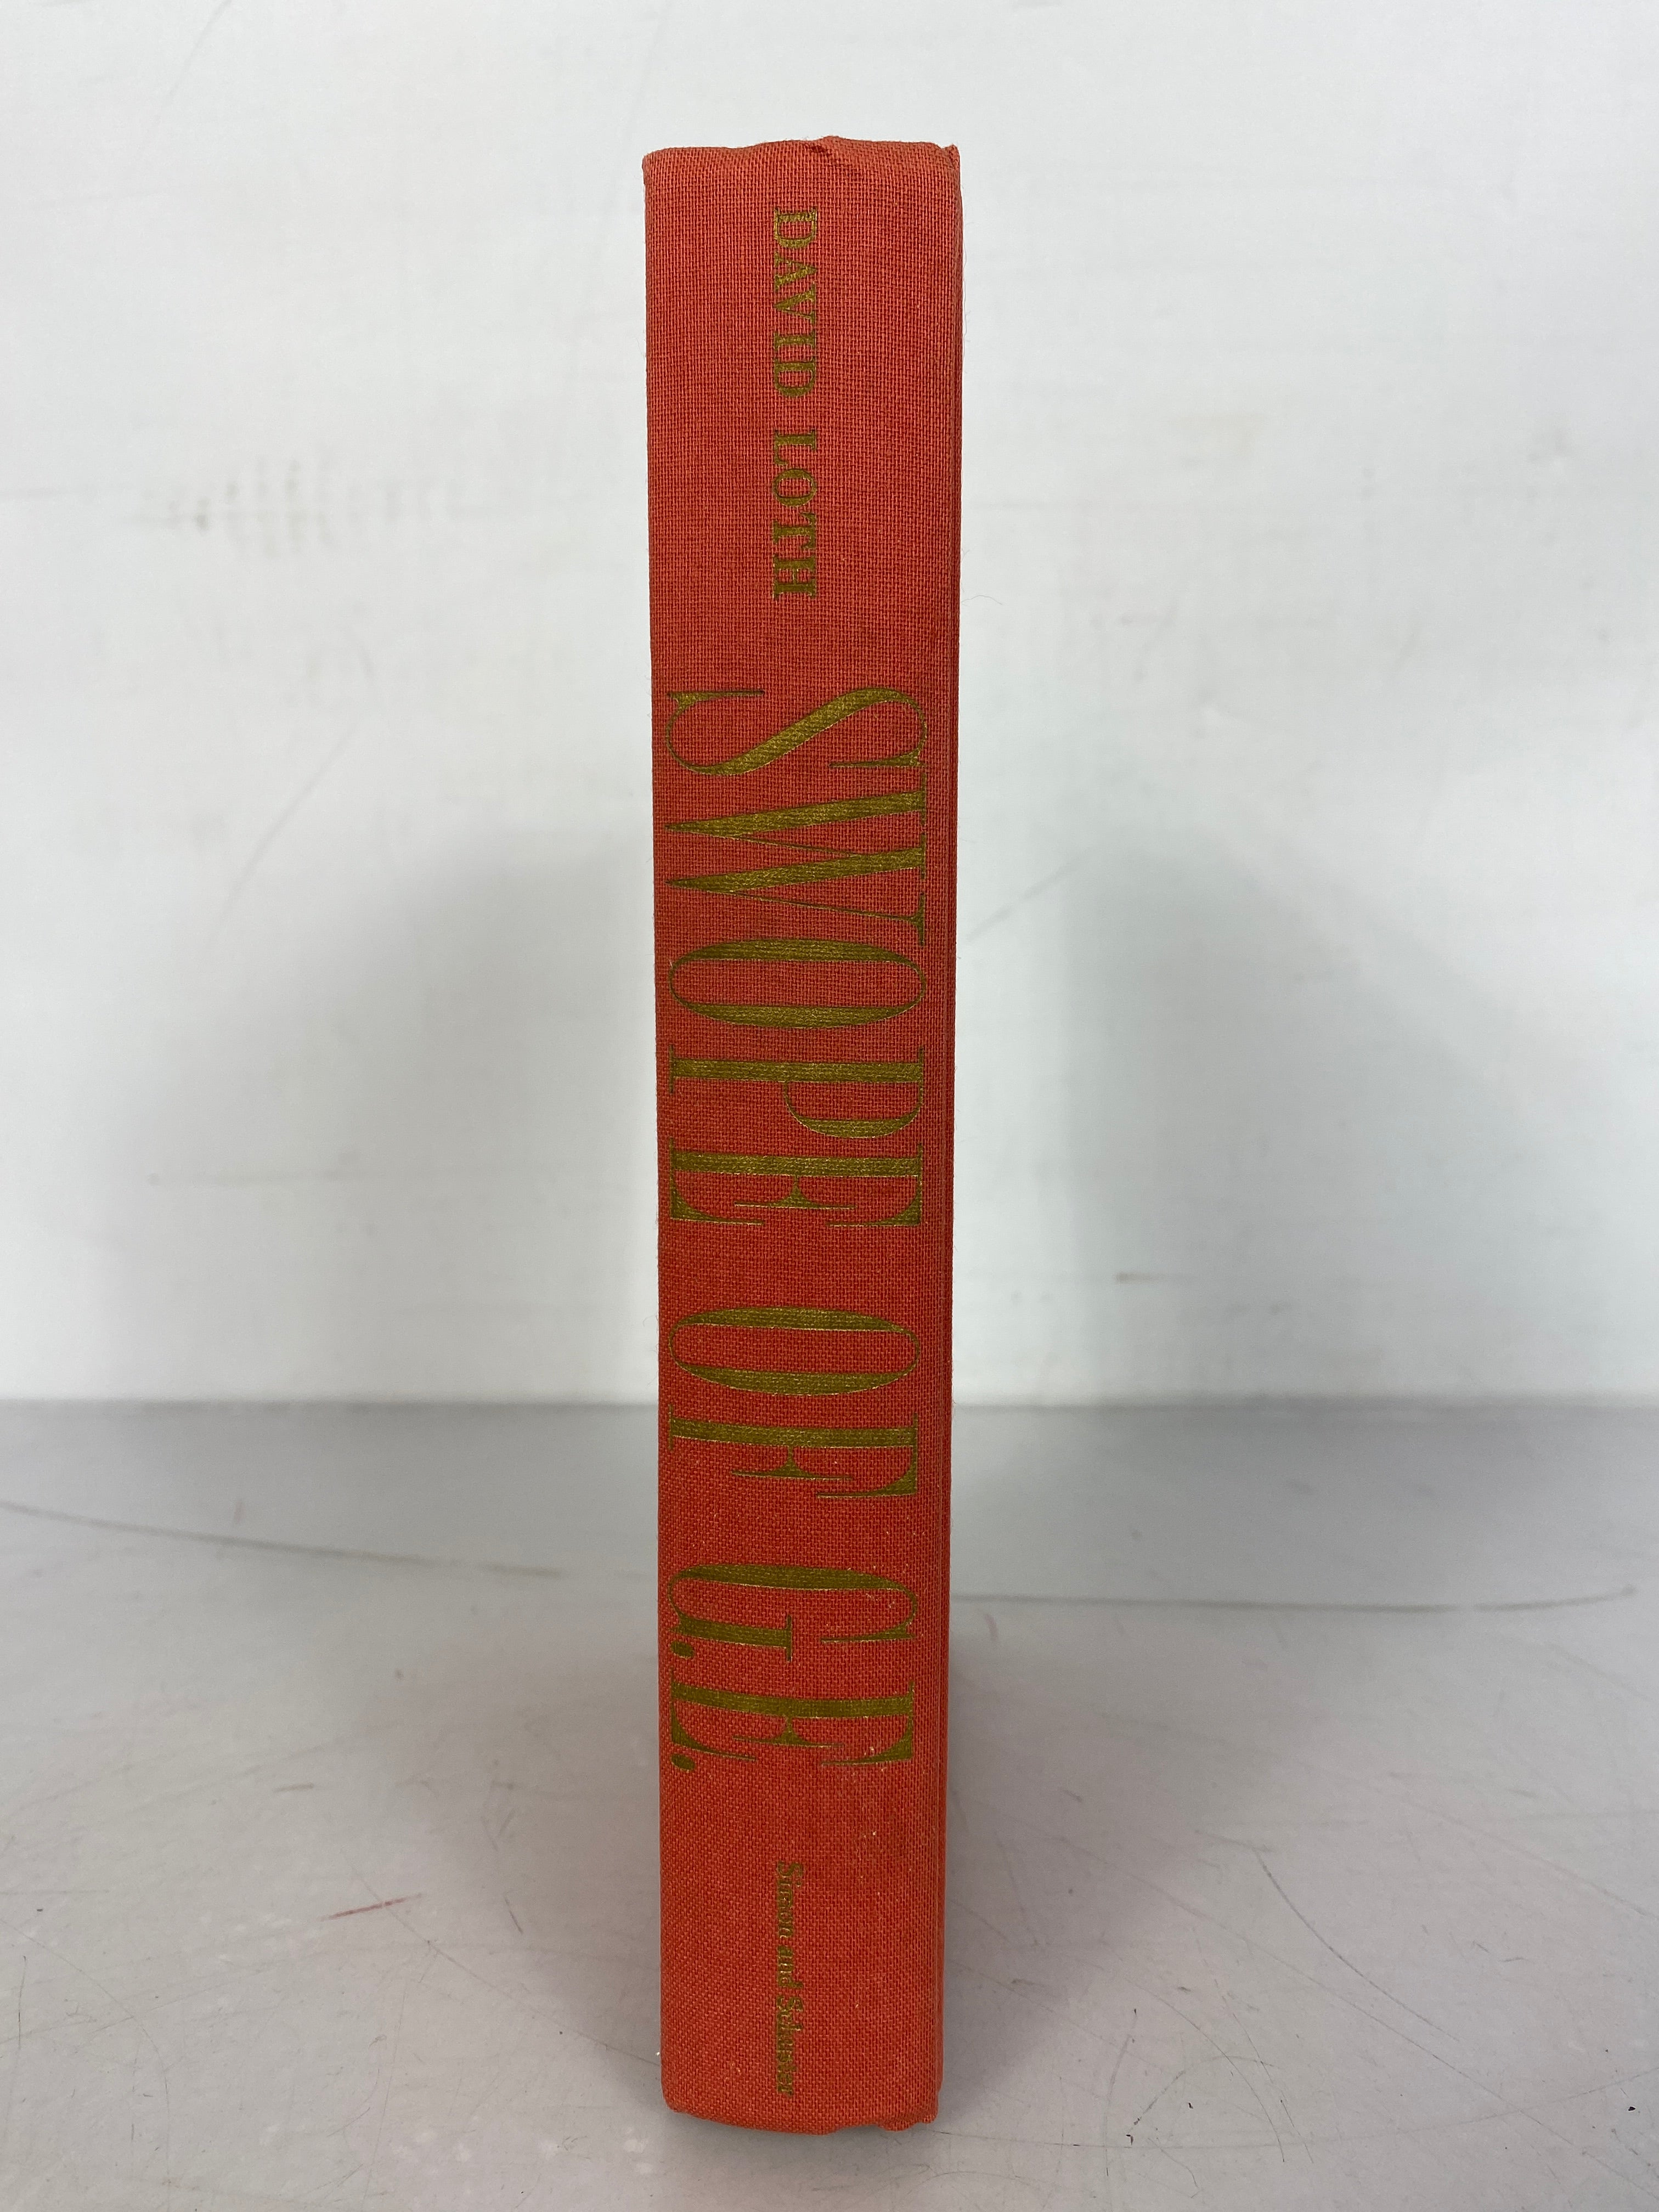 Swope of G.E. by David Loth First Edition First Printing 1958 HC DJ